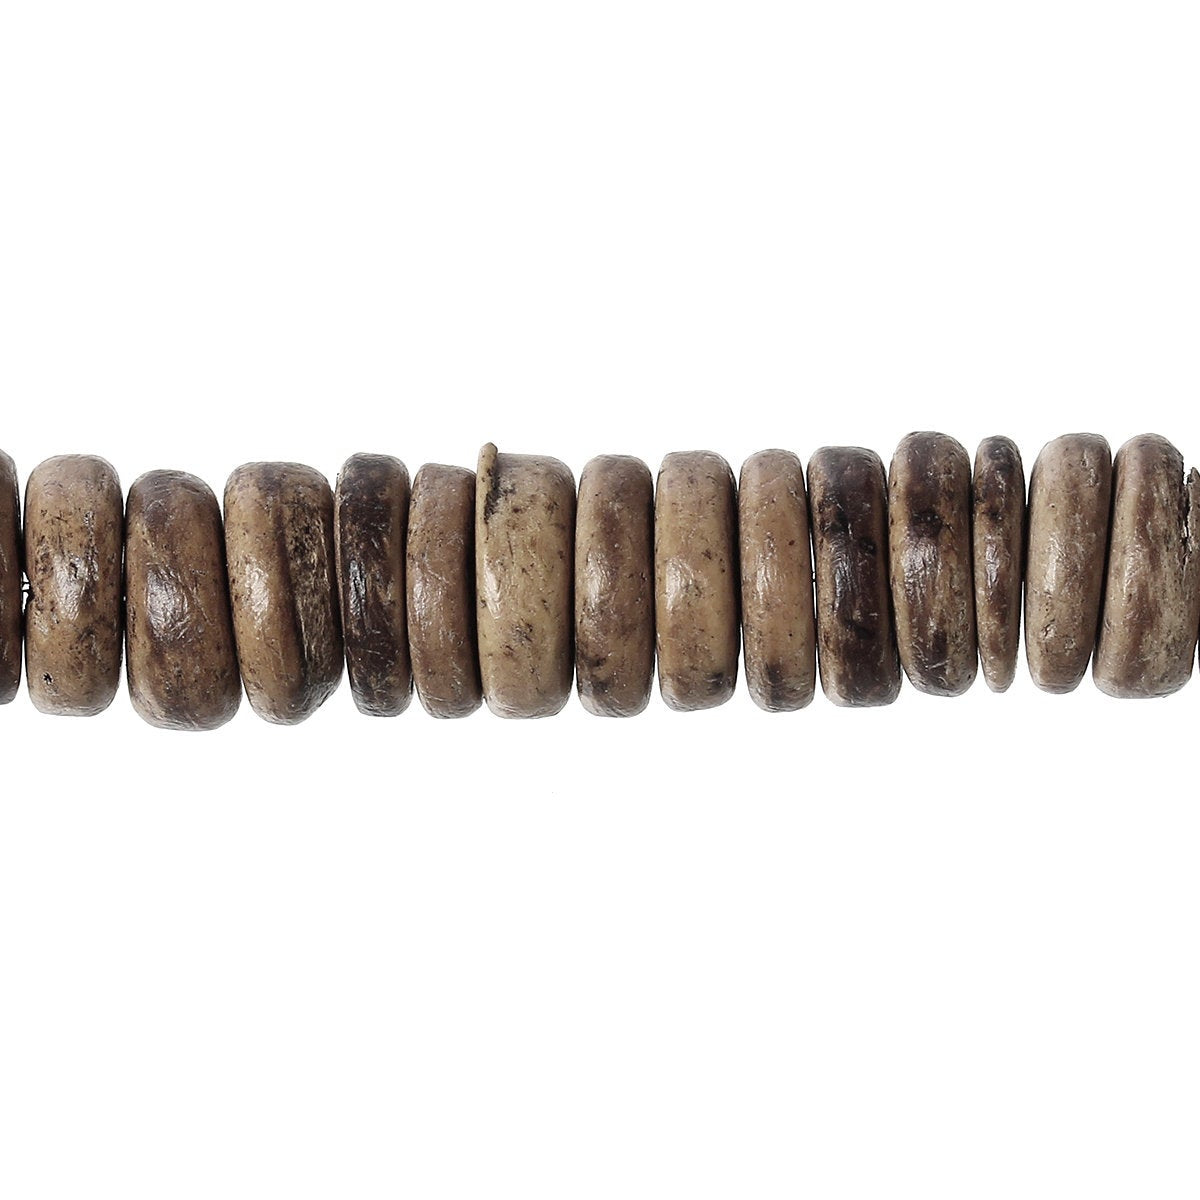 100 Coconut shell beads - Eco friendly donuts rondelle disk beads 10mm